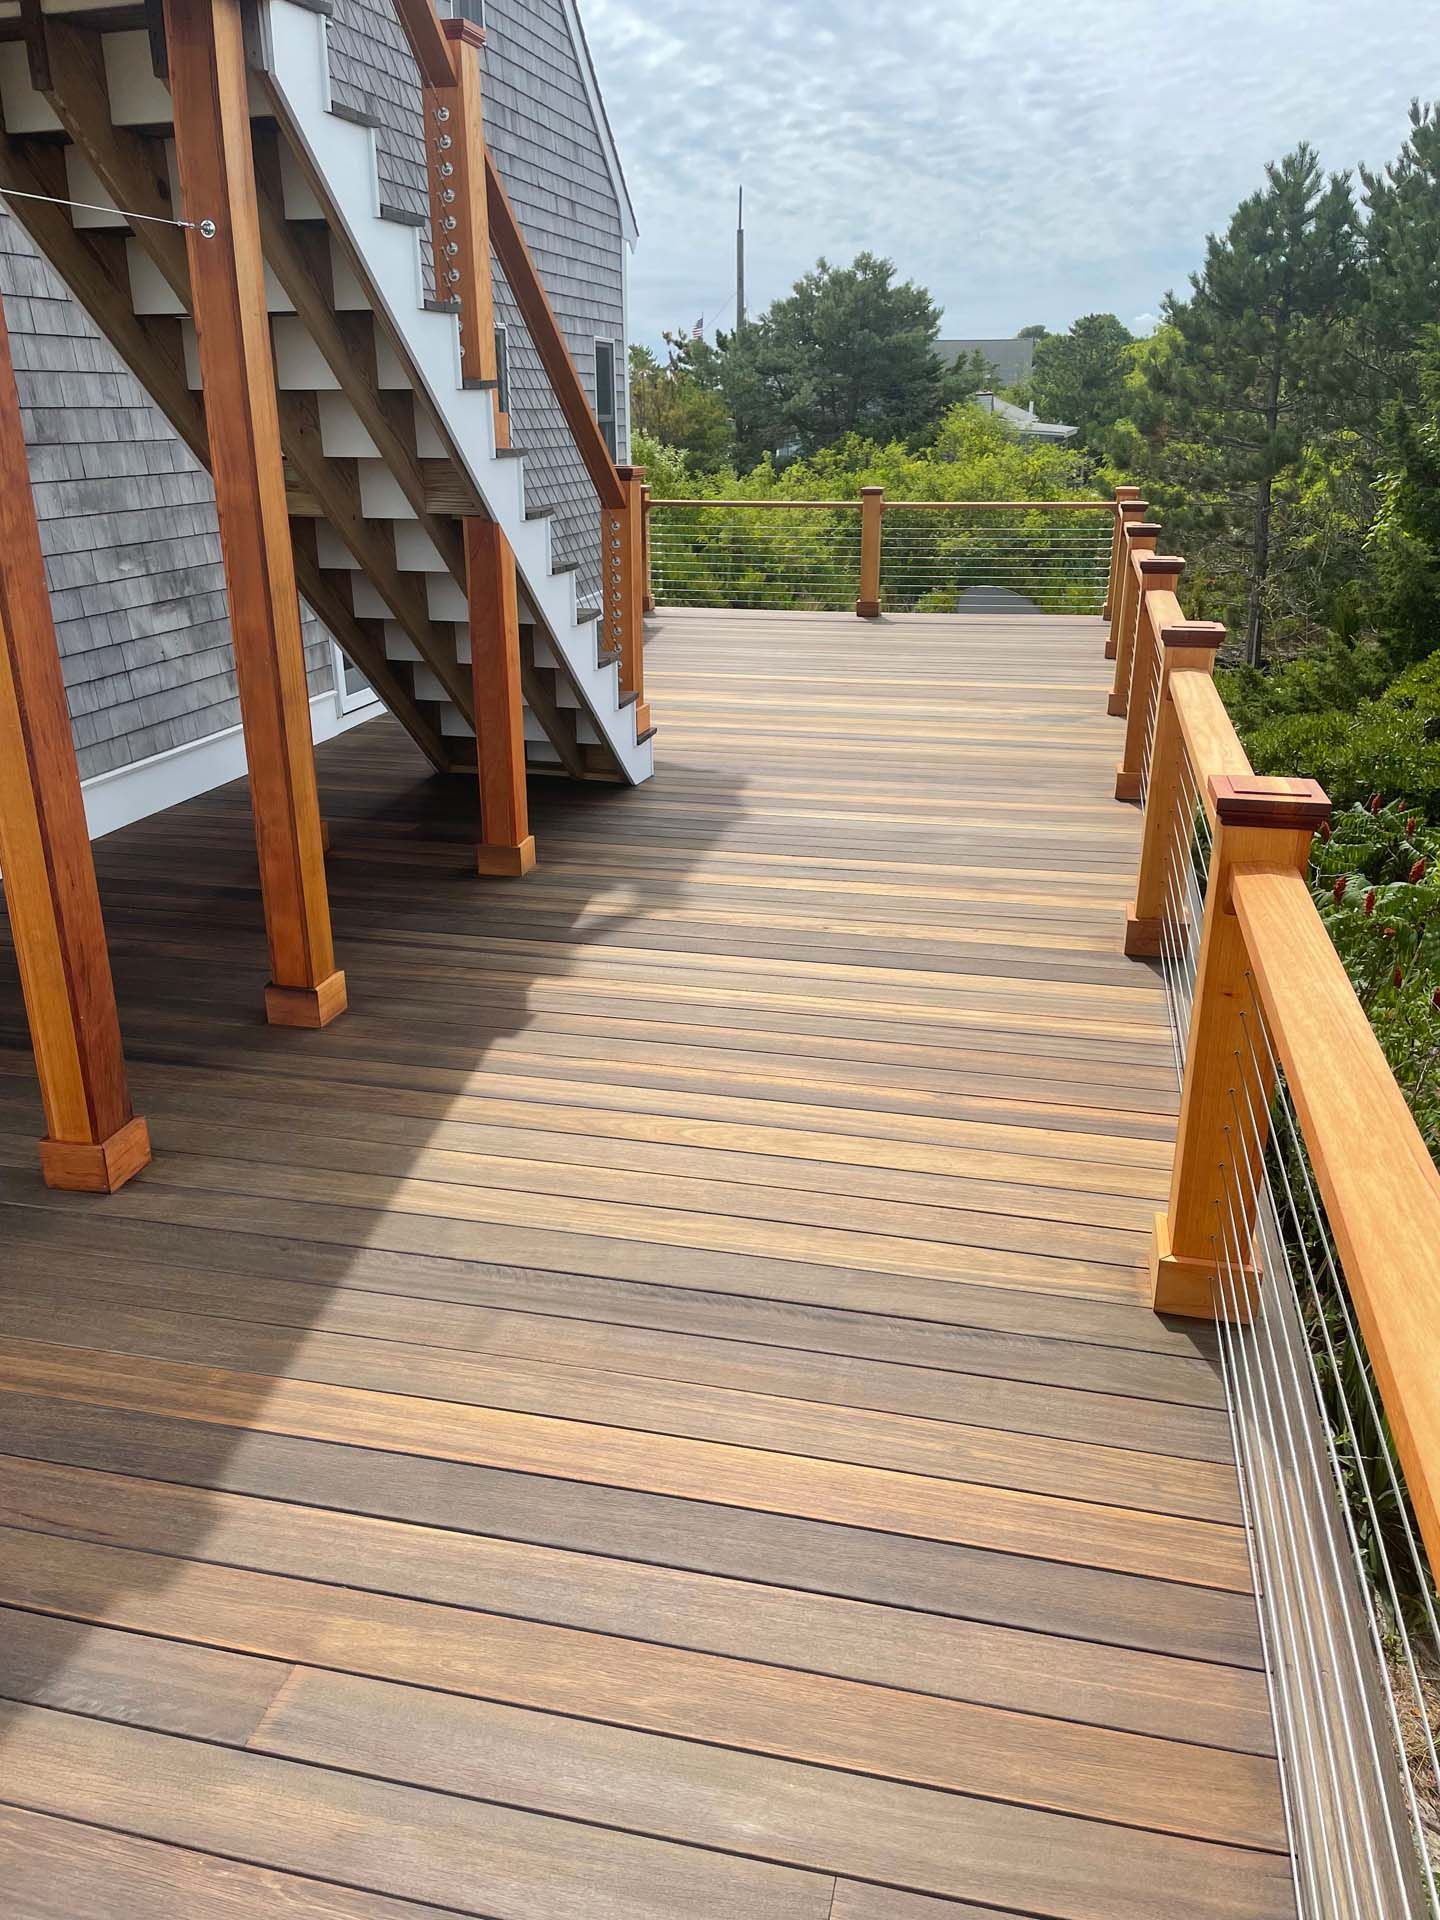 Deck carpentry and deck staining